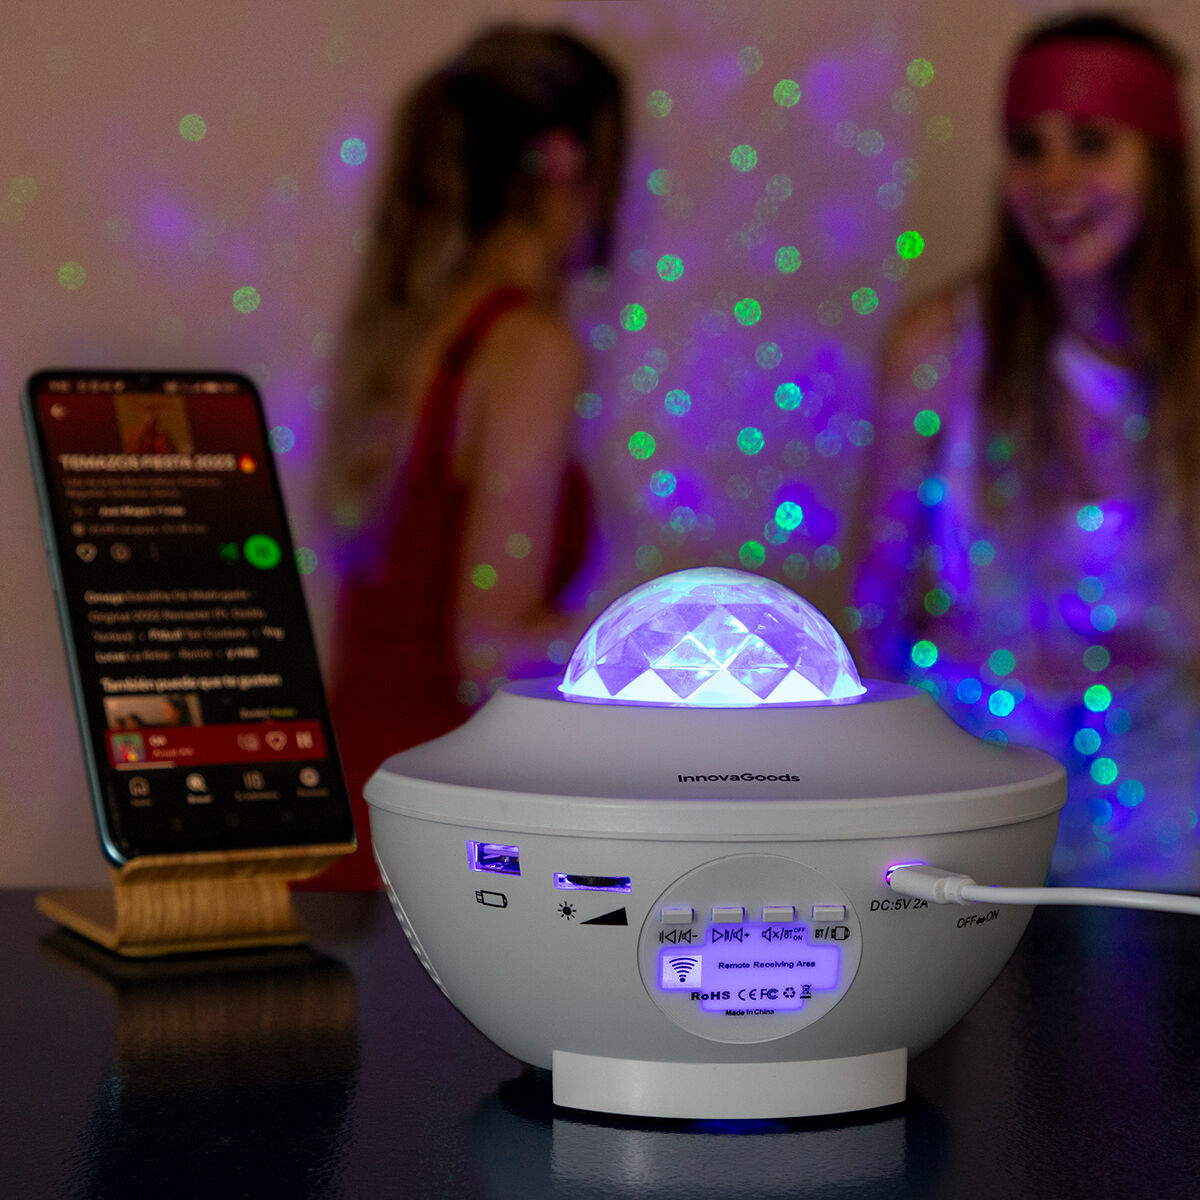 LED Galaxy Projector Galedxy InnovaGoods - InnovaGoods